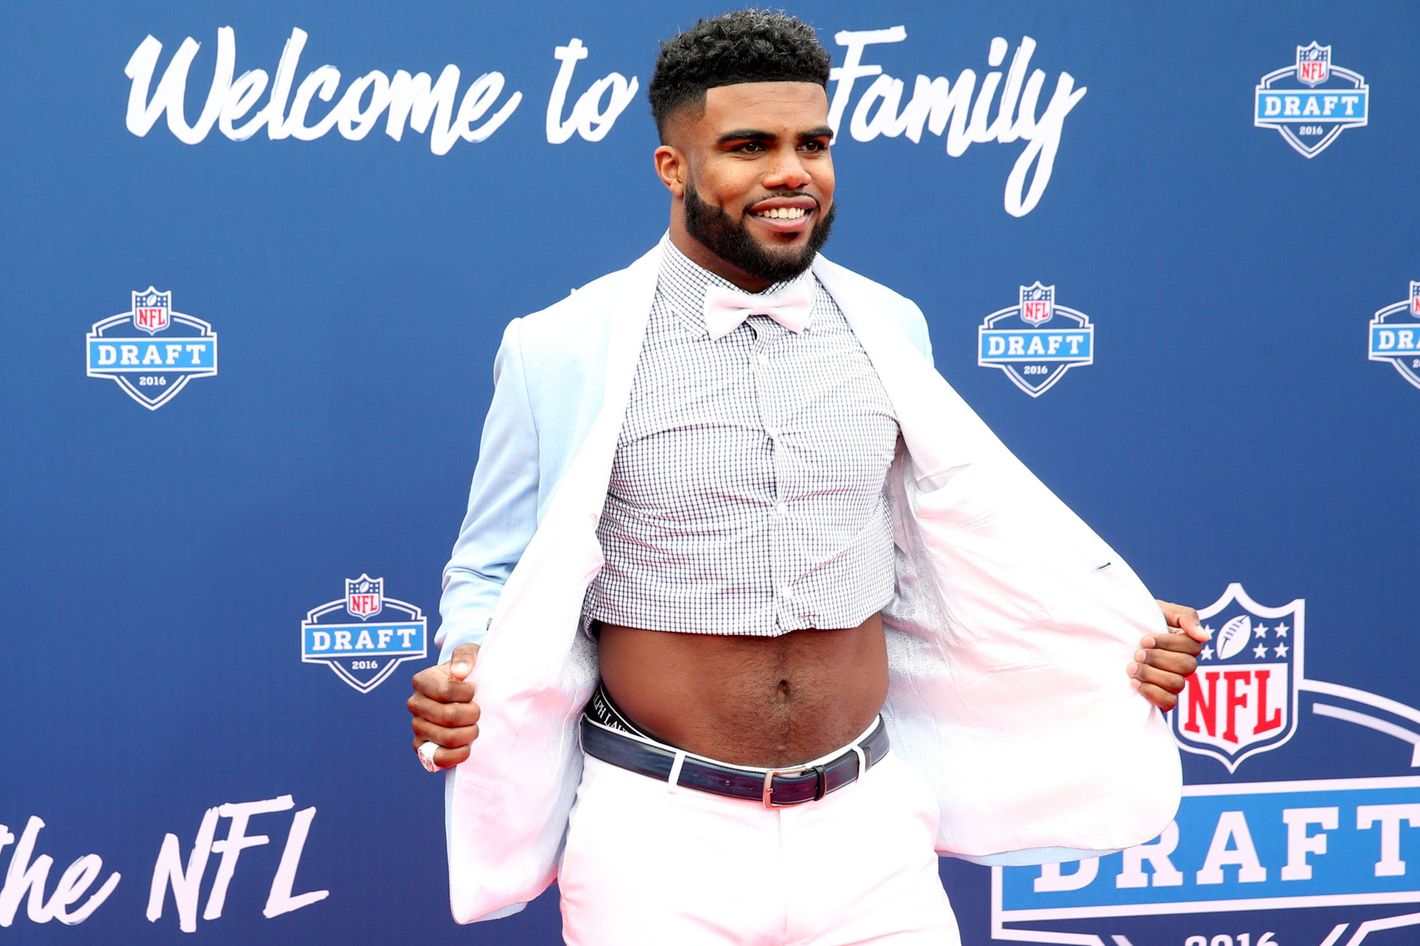 NFL Player Wore a Very Distracting Crop Top